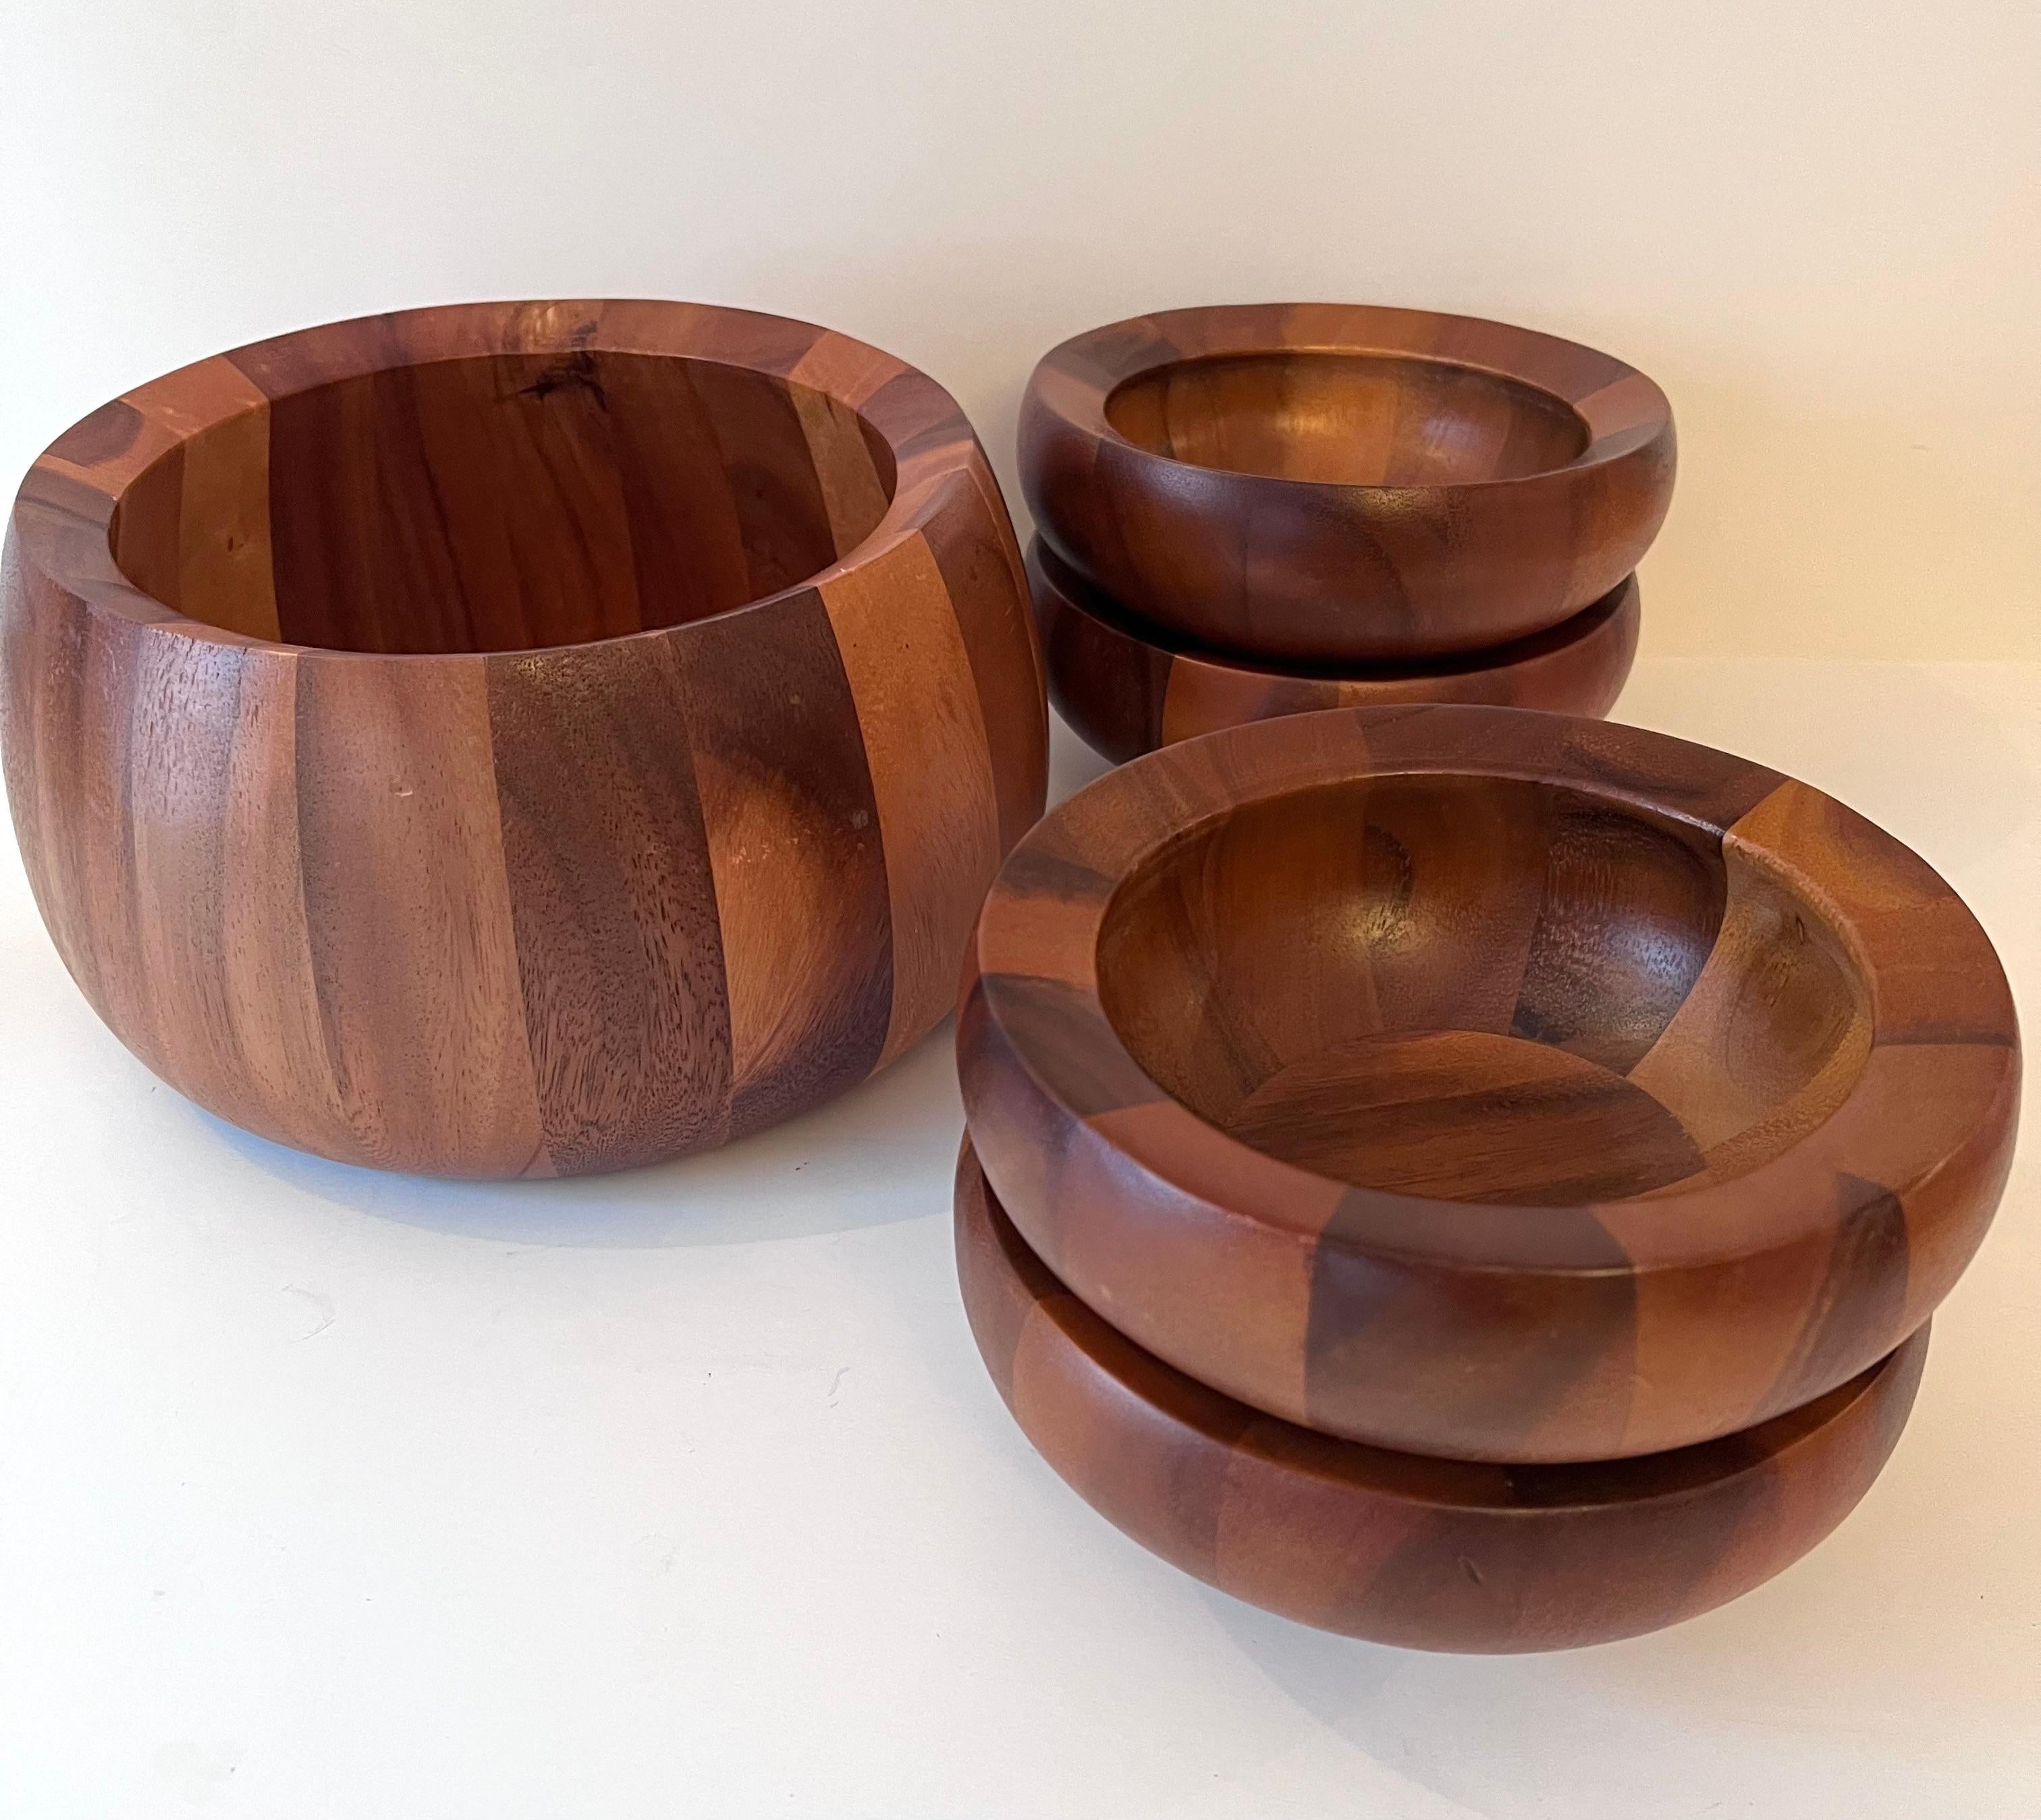 A lovely Danish Teak Salad Bowl with 4 serving bowls. A very clean and popular design - all functional and stylish in Danish Design by Jens Quistgaard

Four bowls measure 7